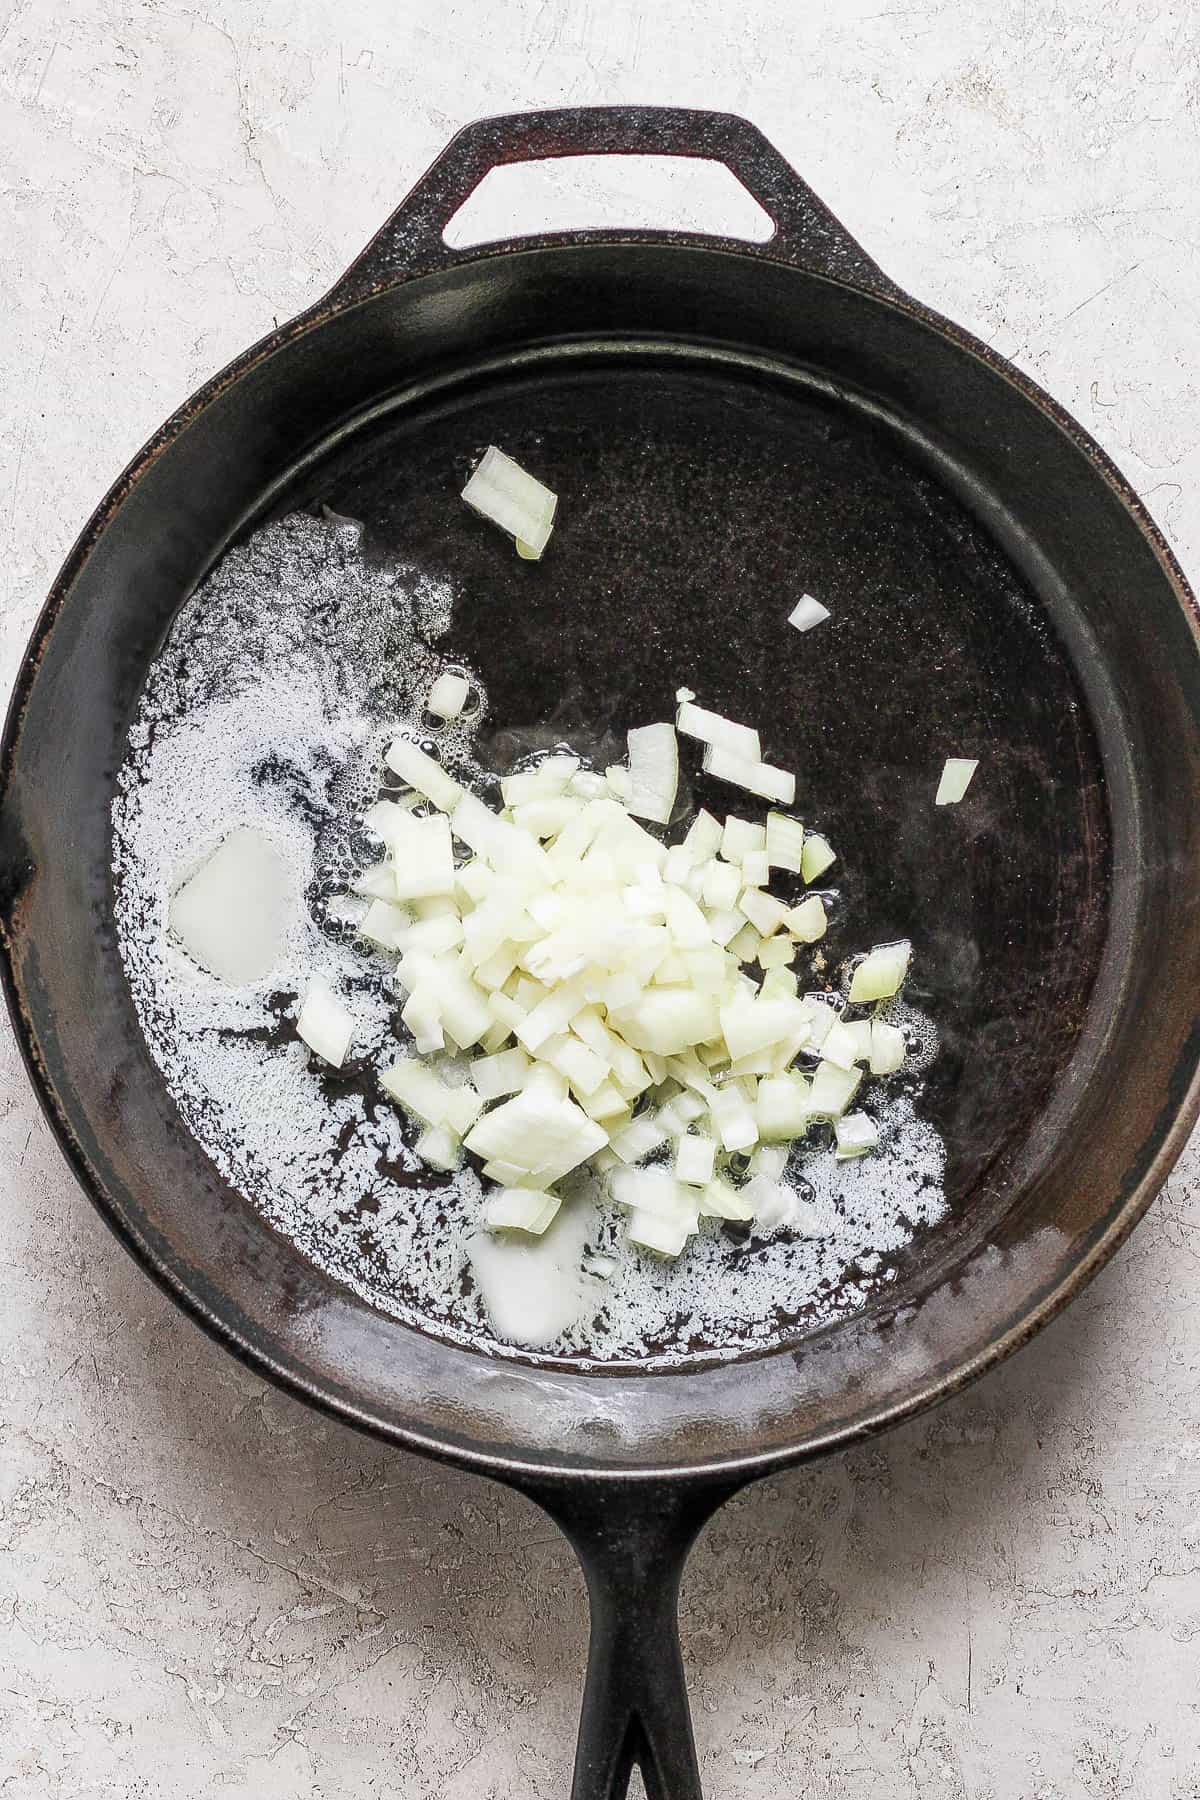 Butter melting in a cast iron skillet with chopped onions added.